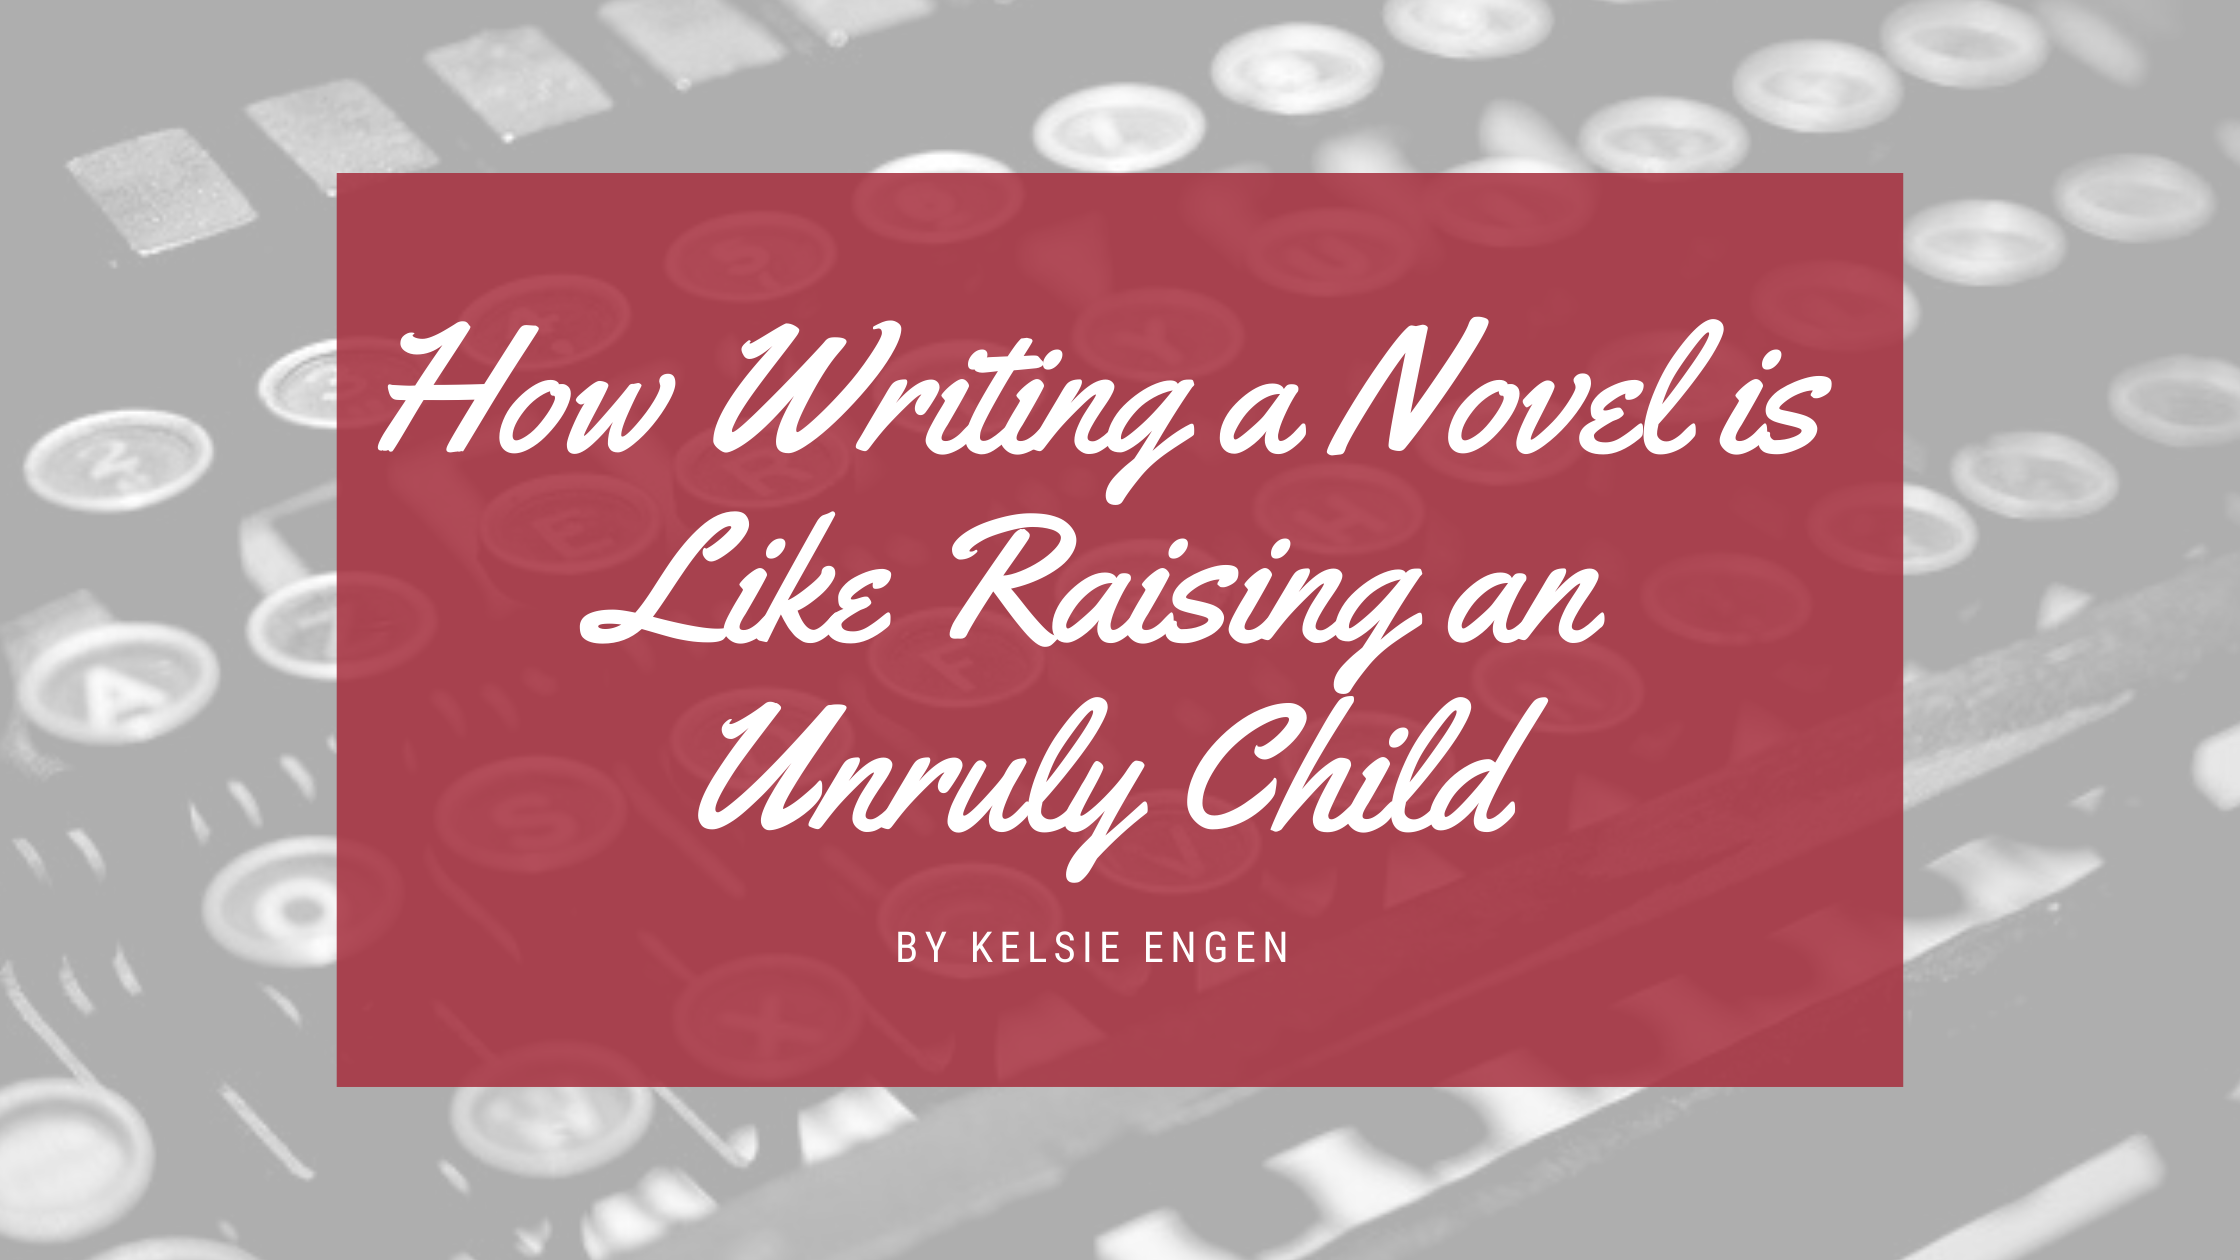 How Writing a Novel is Like Raising an Unruly Child